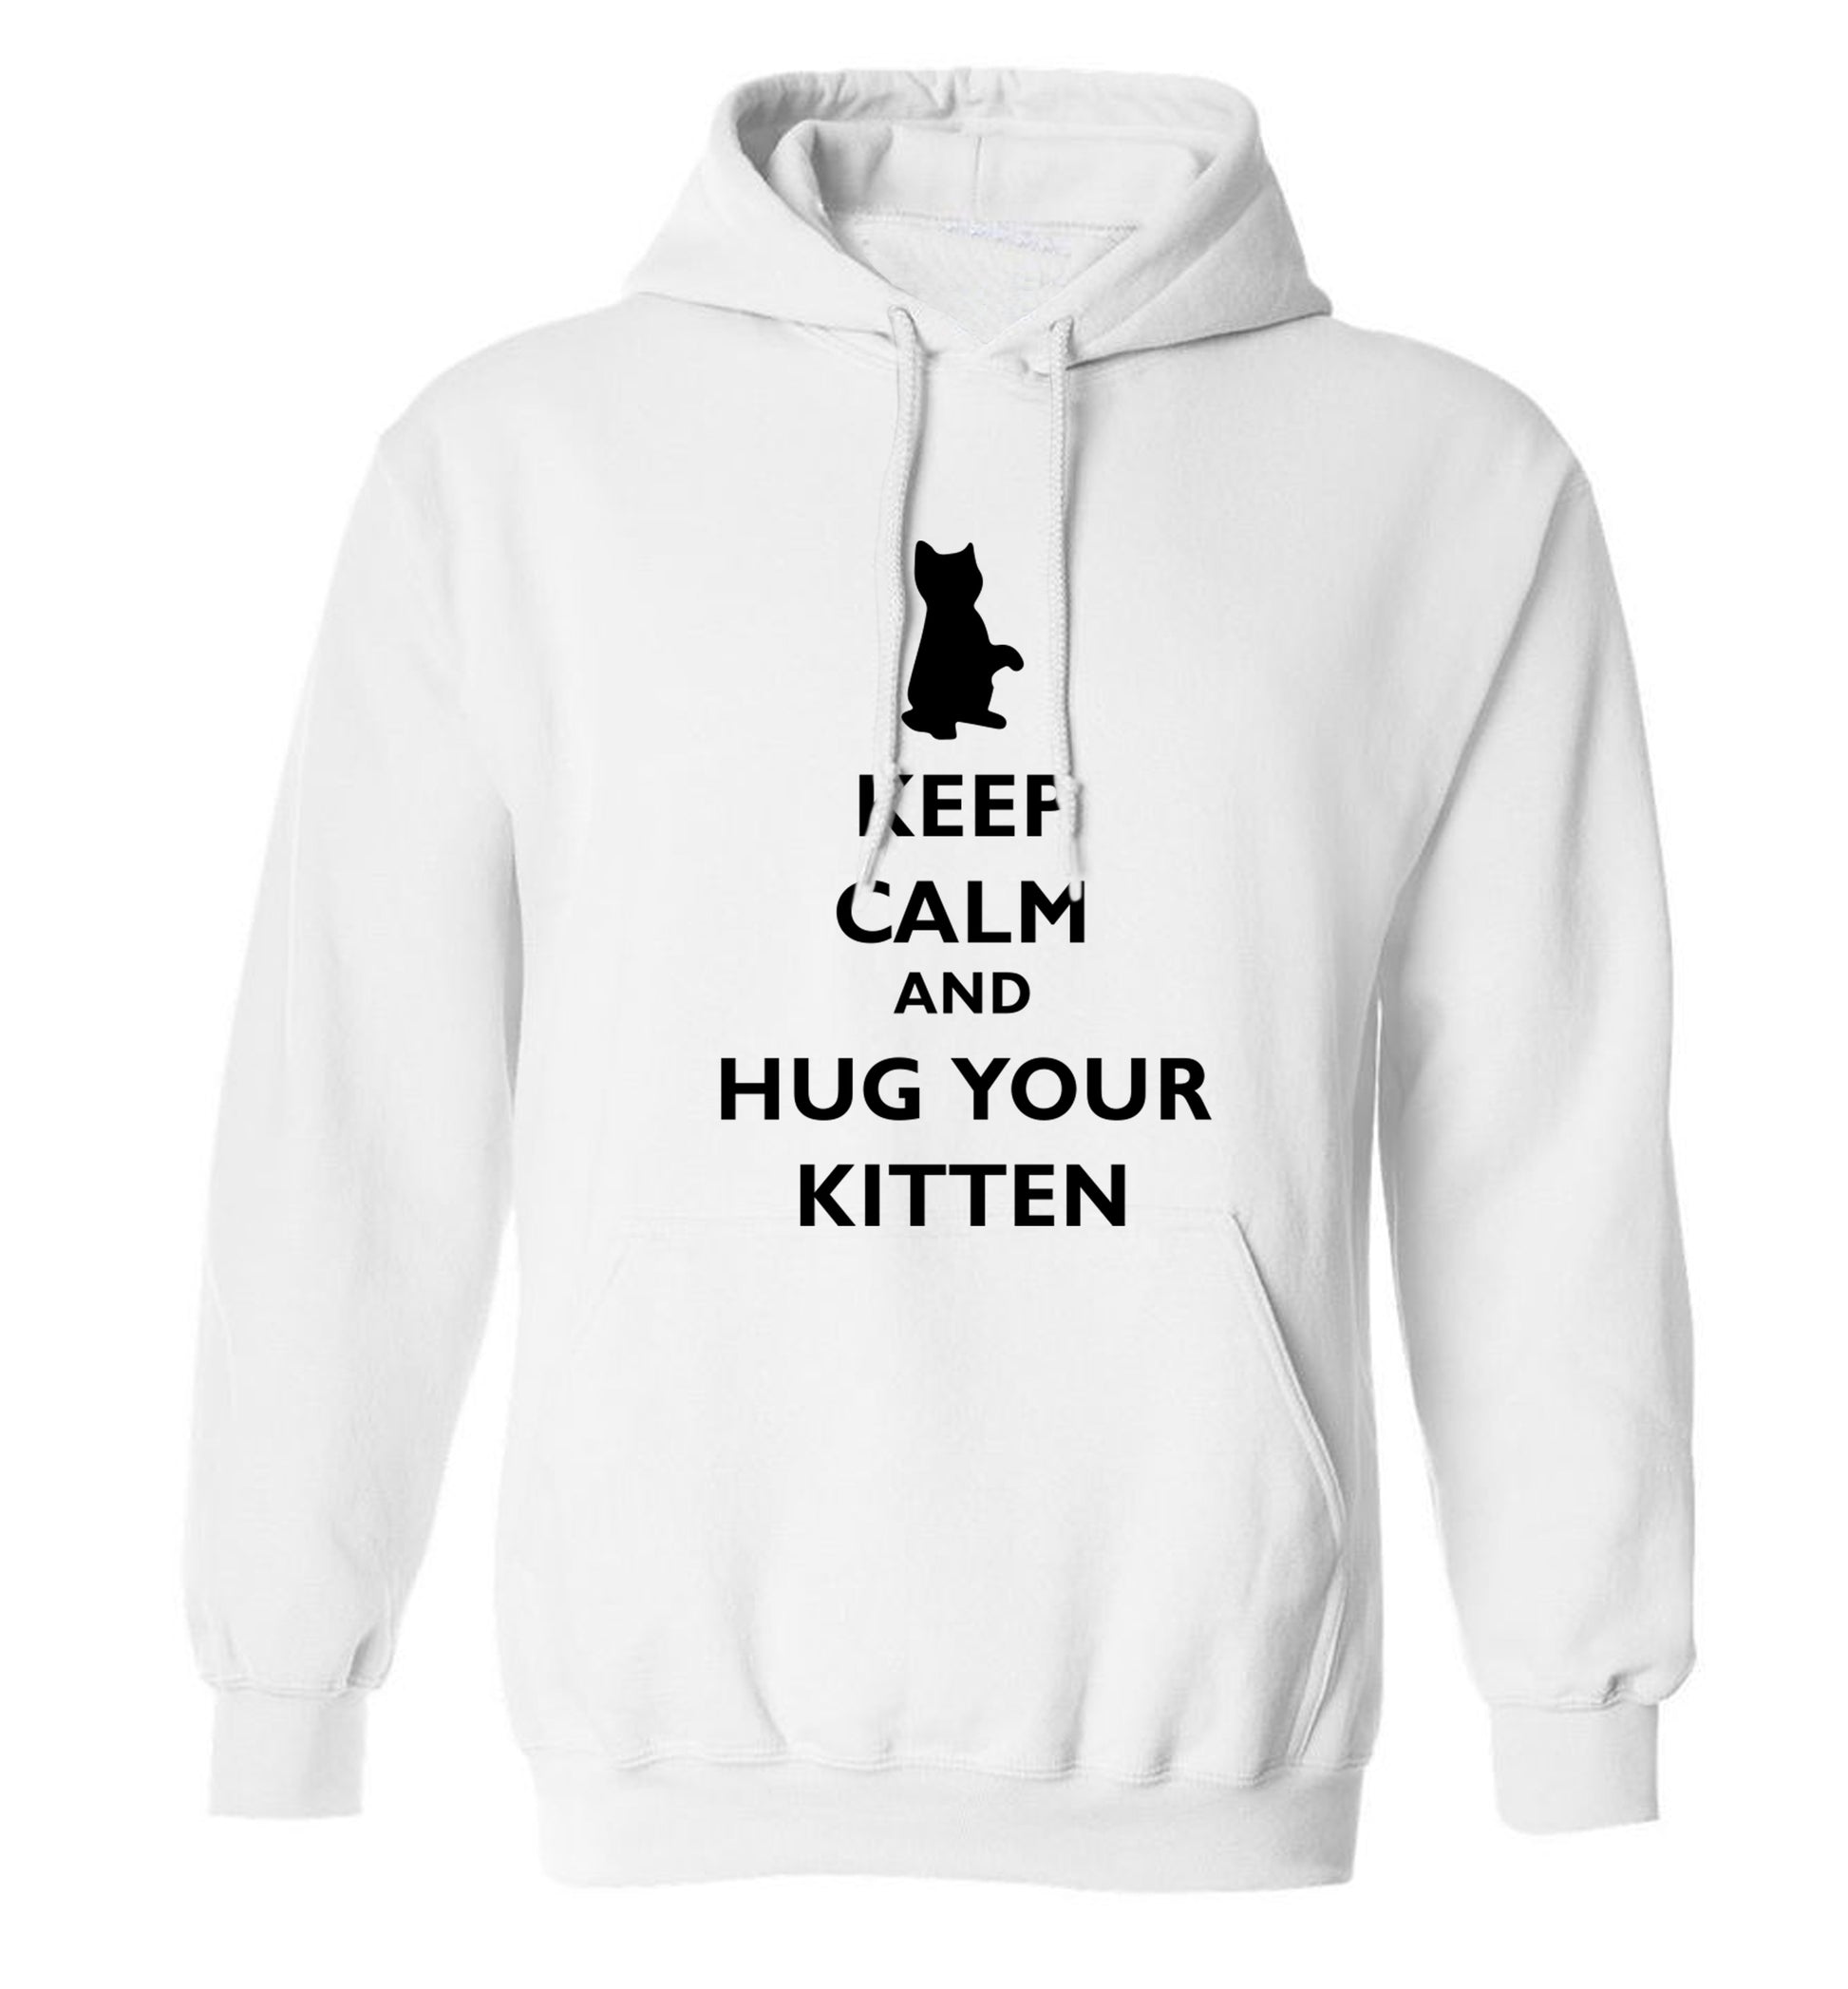 Keep calm and hug your kitten adults unisex white hoodie 2XL